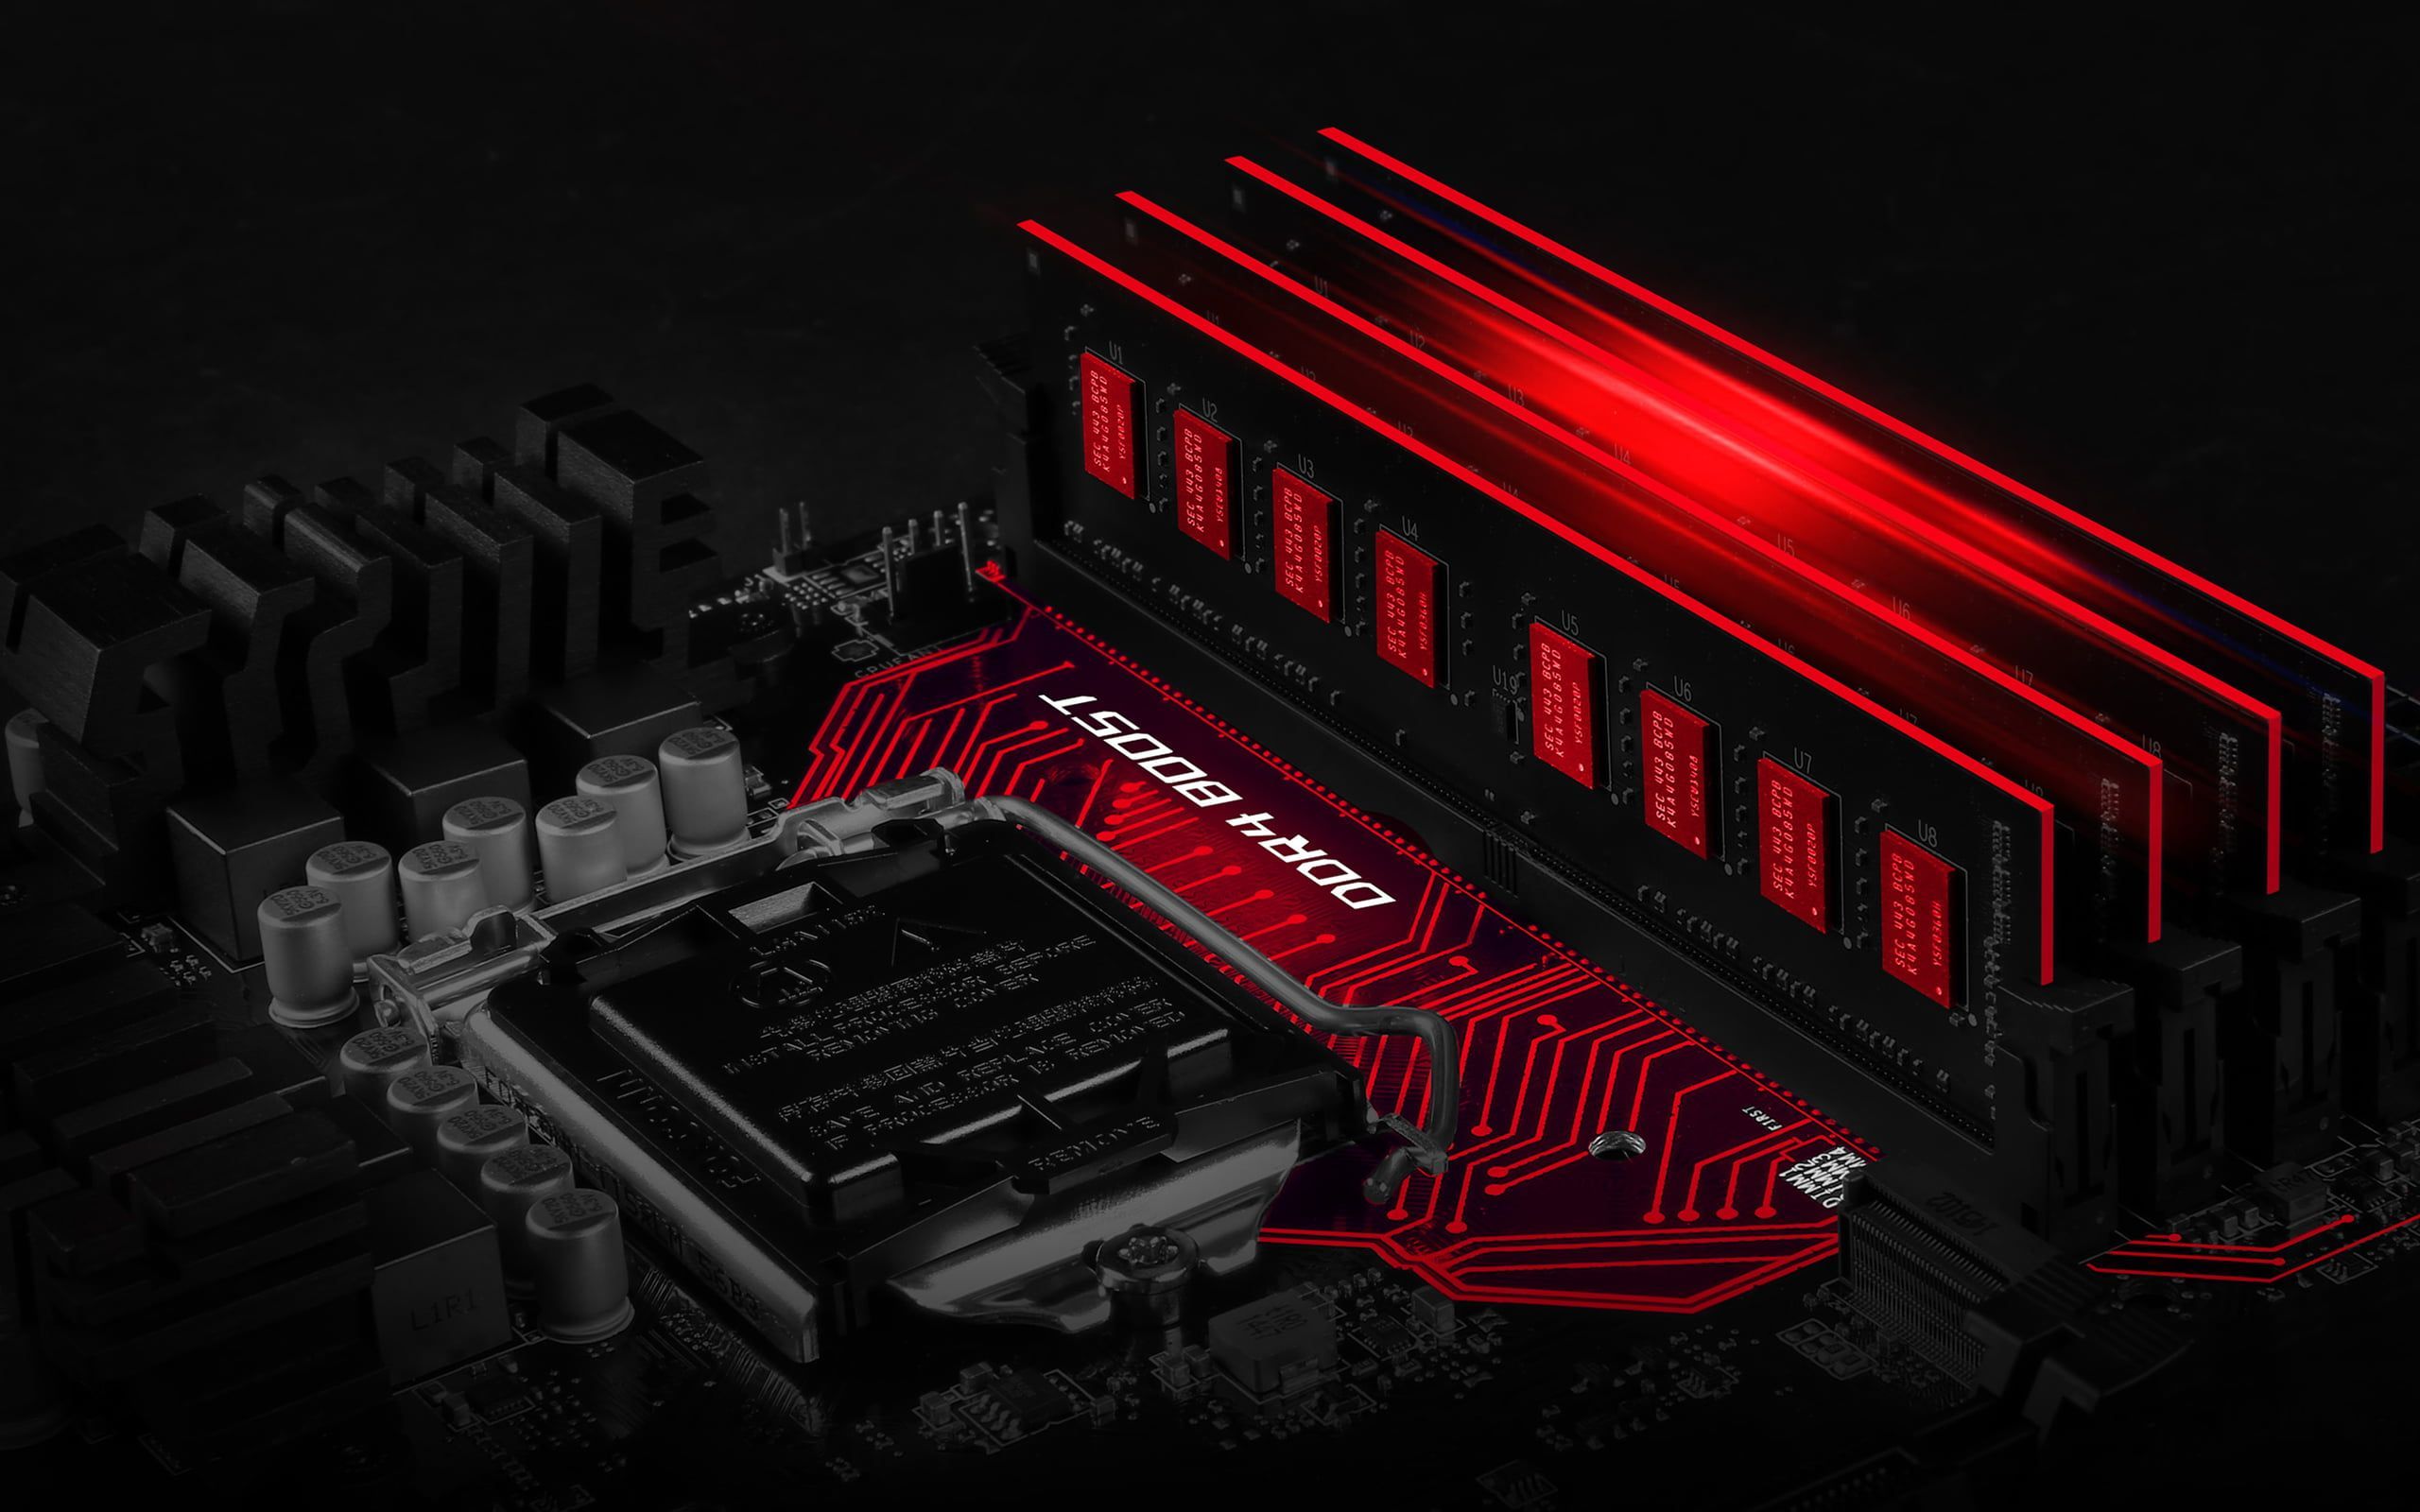 black and red motherboard PC gaming #motherboards #MSI #computer #technology RAM (Computing) K #wallpaper #hdwallp. Best ram, Computer wallpaper hd, Motherboard